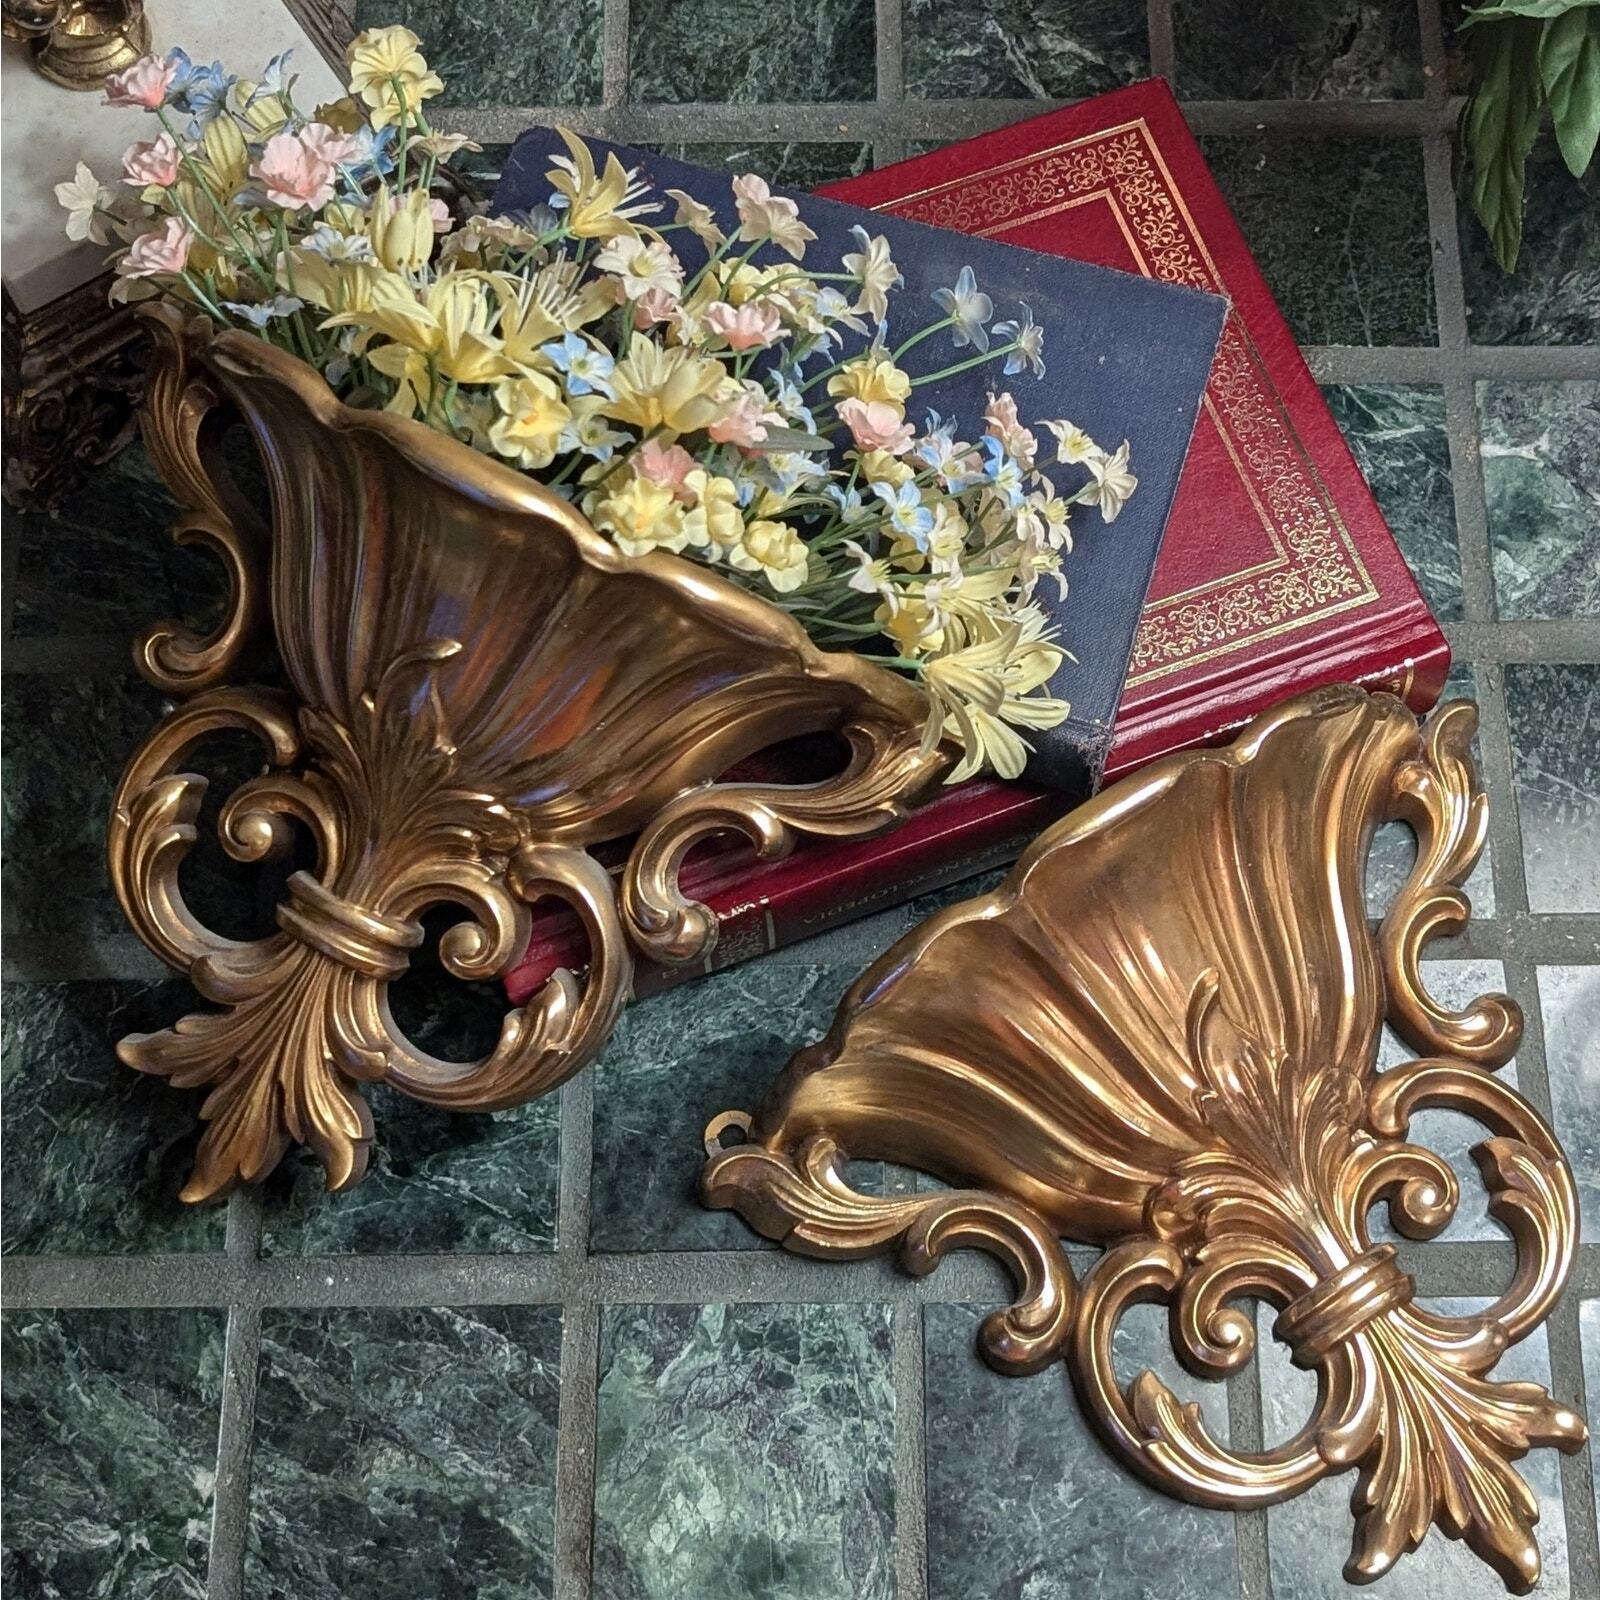 Pair of Vintage Gold Syroco Floral Wall Sconce Planters